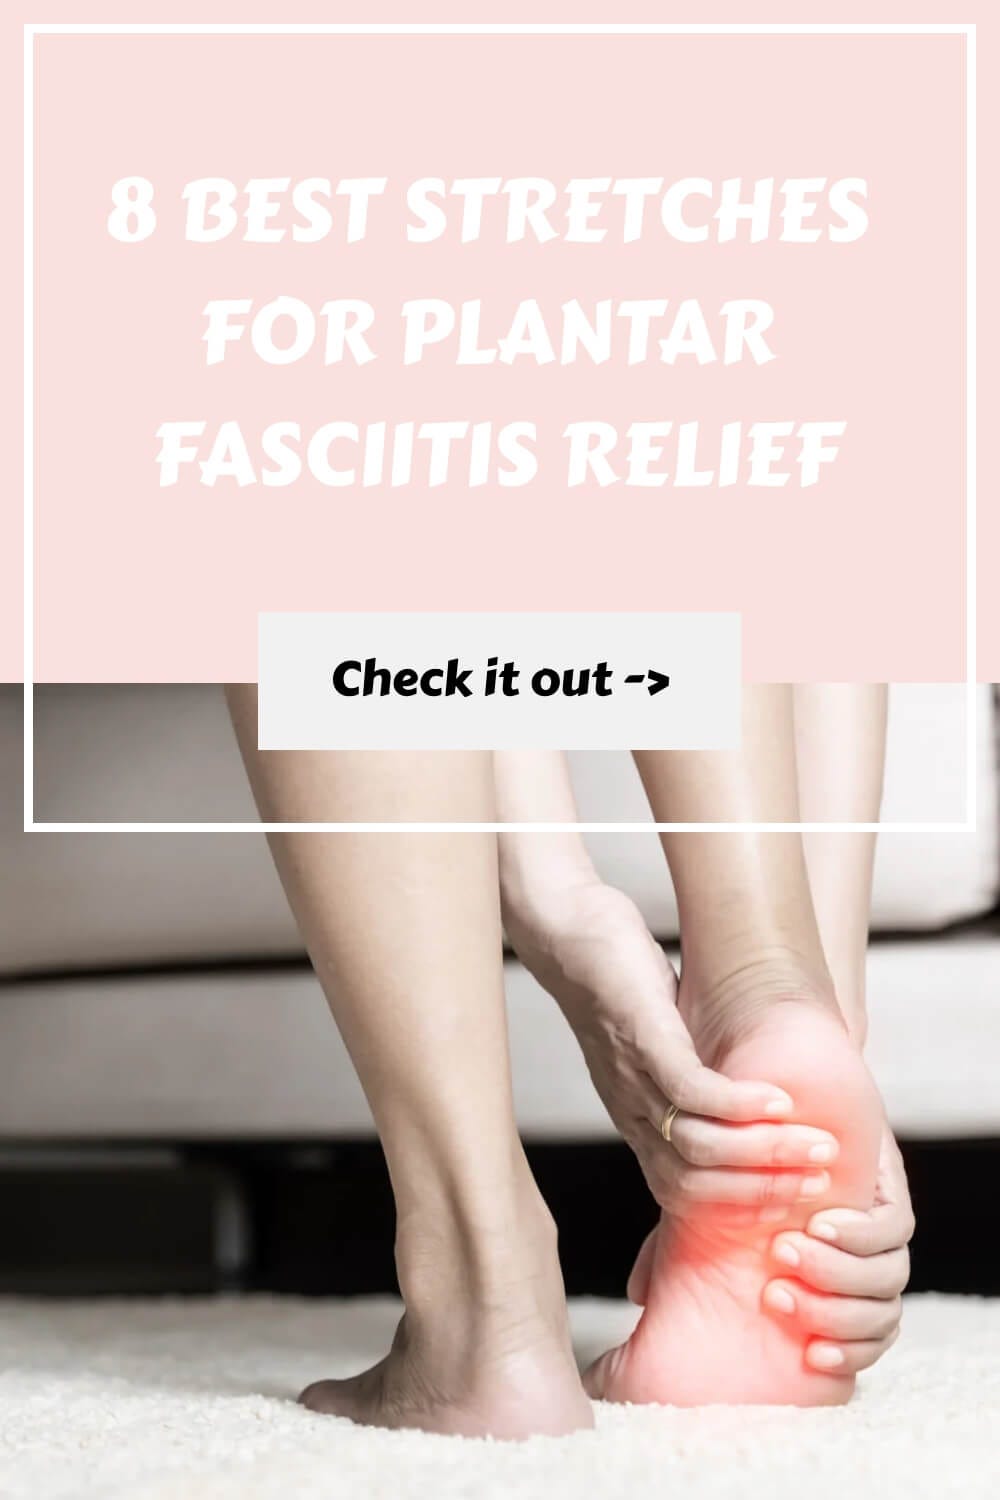 Plantar Fasciitis Stretches for Pain Relief